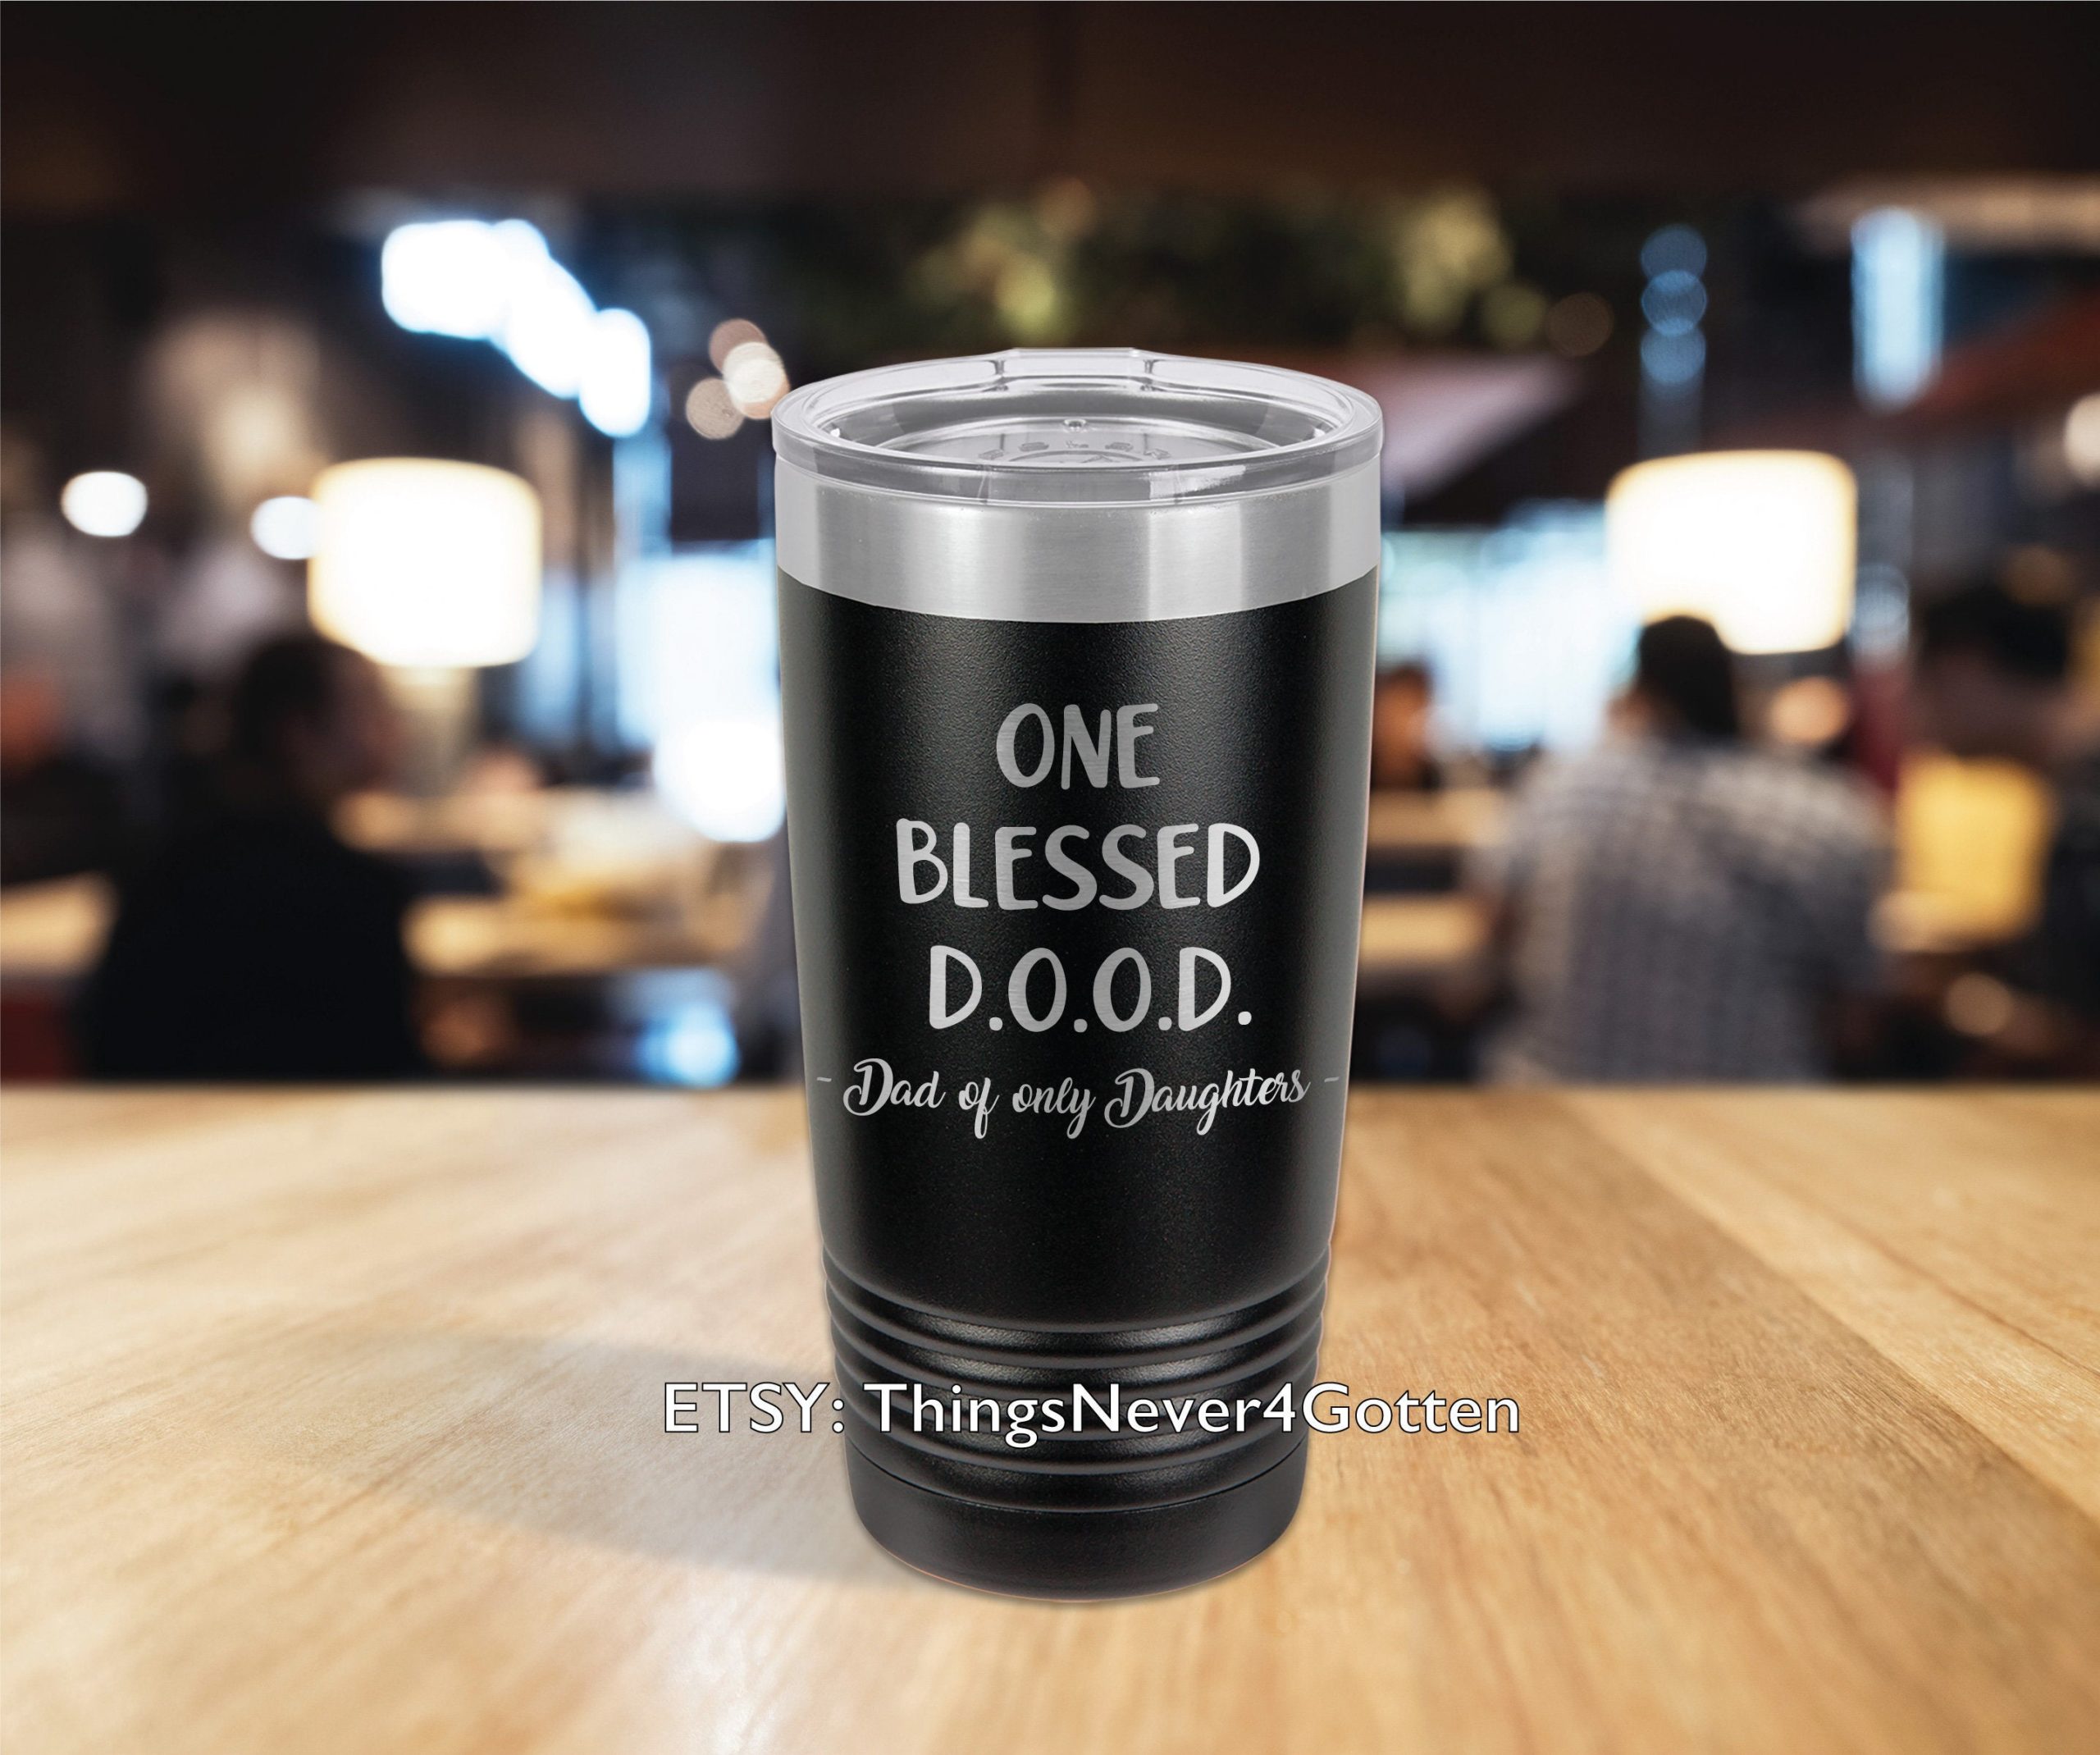 https://thingsneverforgotten.com/wp-content/uploads/2020/07/fathers-day-girl-dad-personalized-gift-laser-engraved-20oz-tumbler-5f0d4a65-scaled.jpg